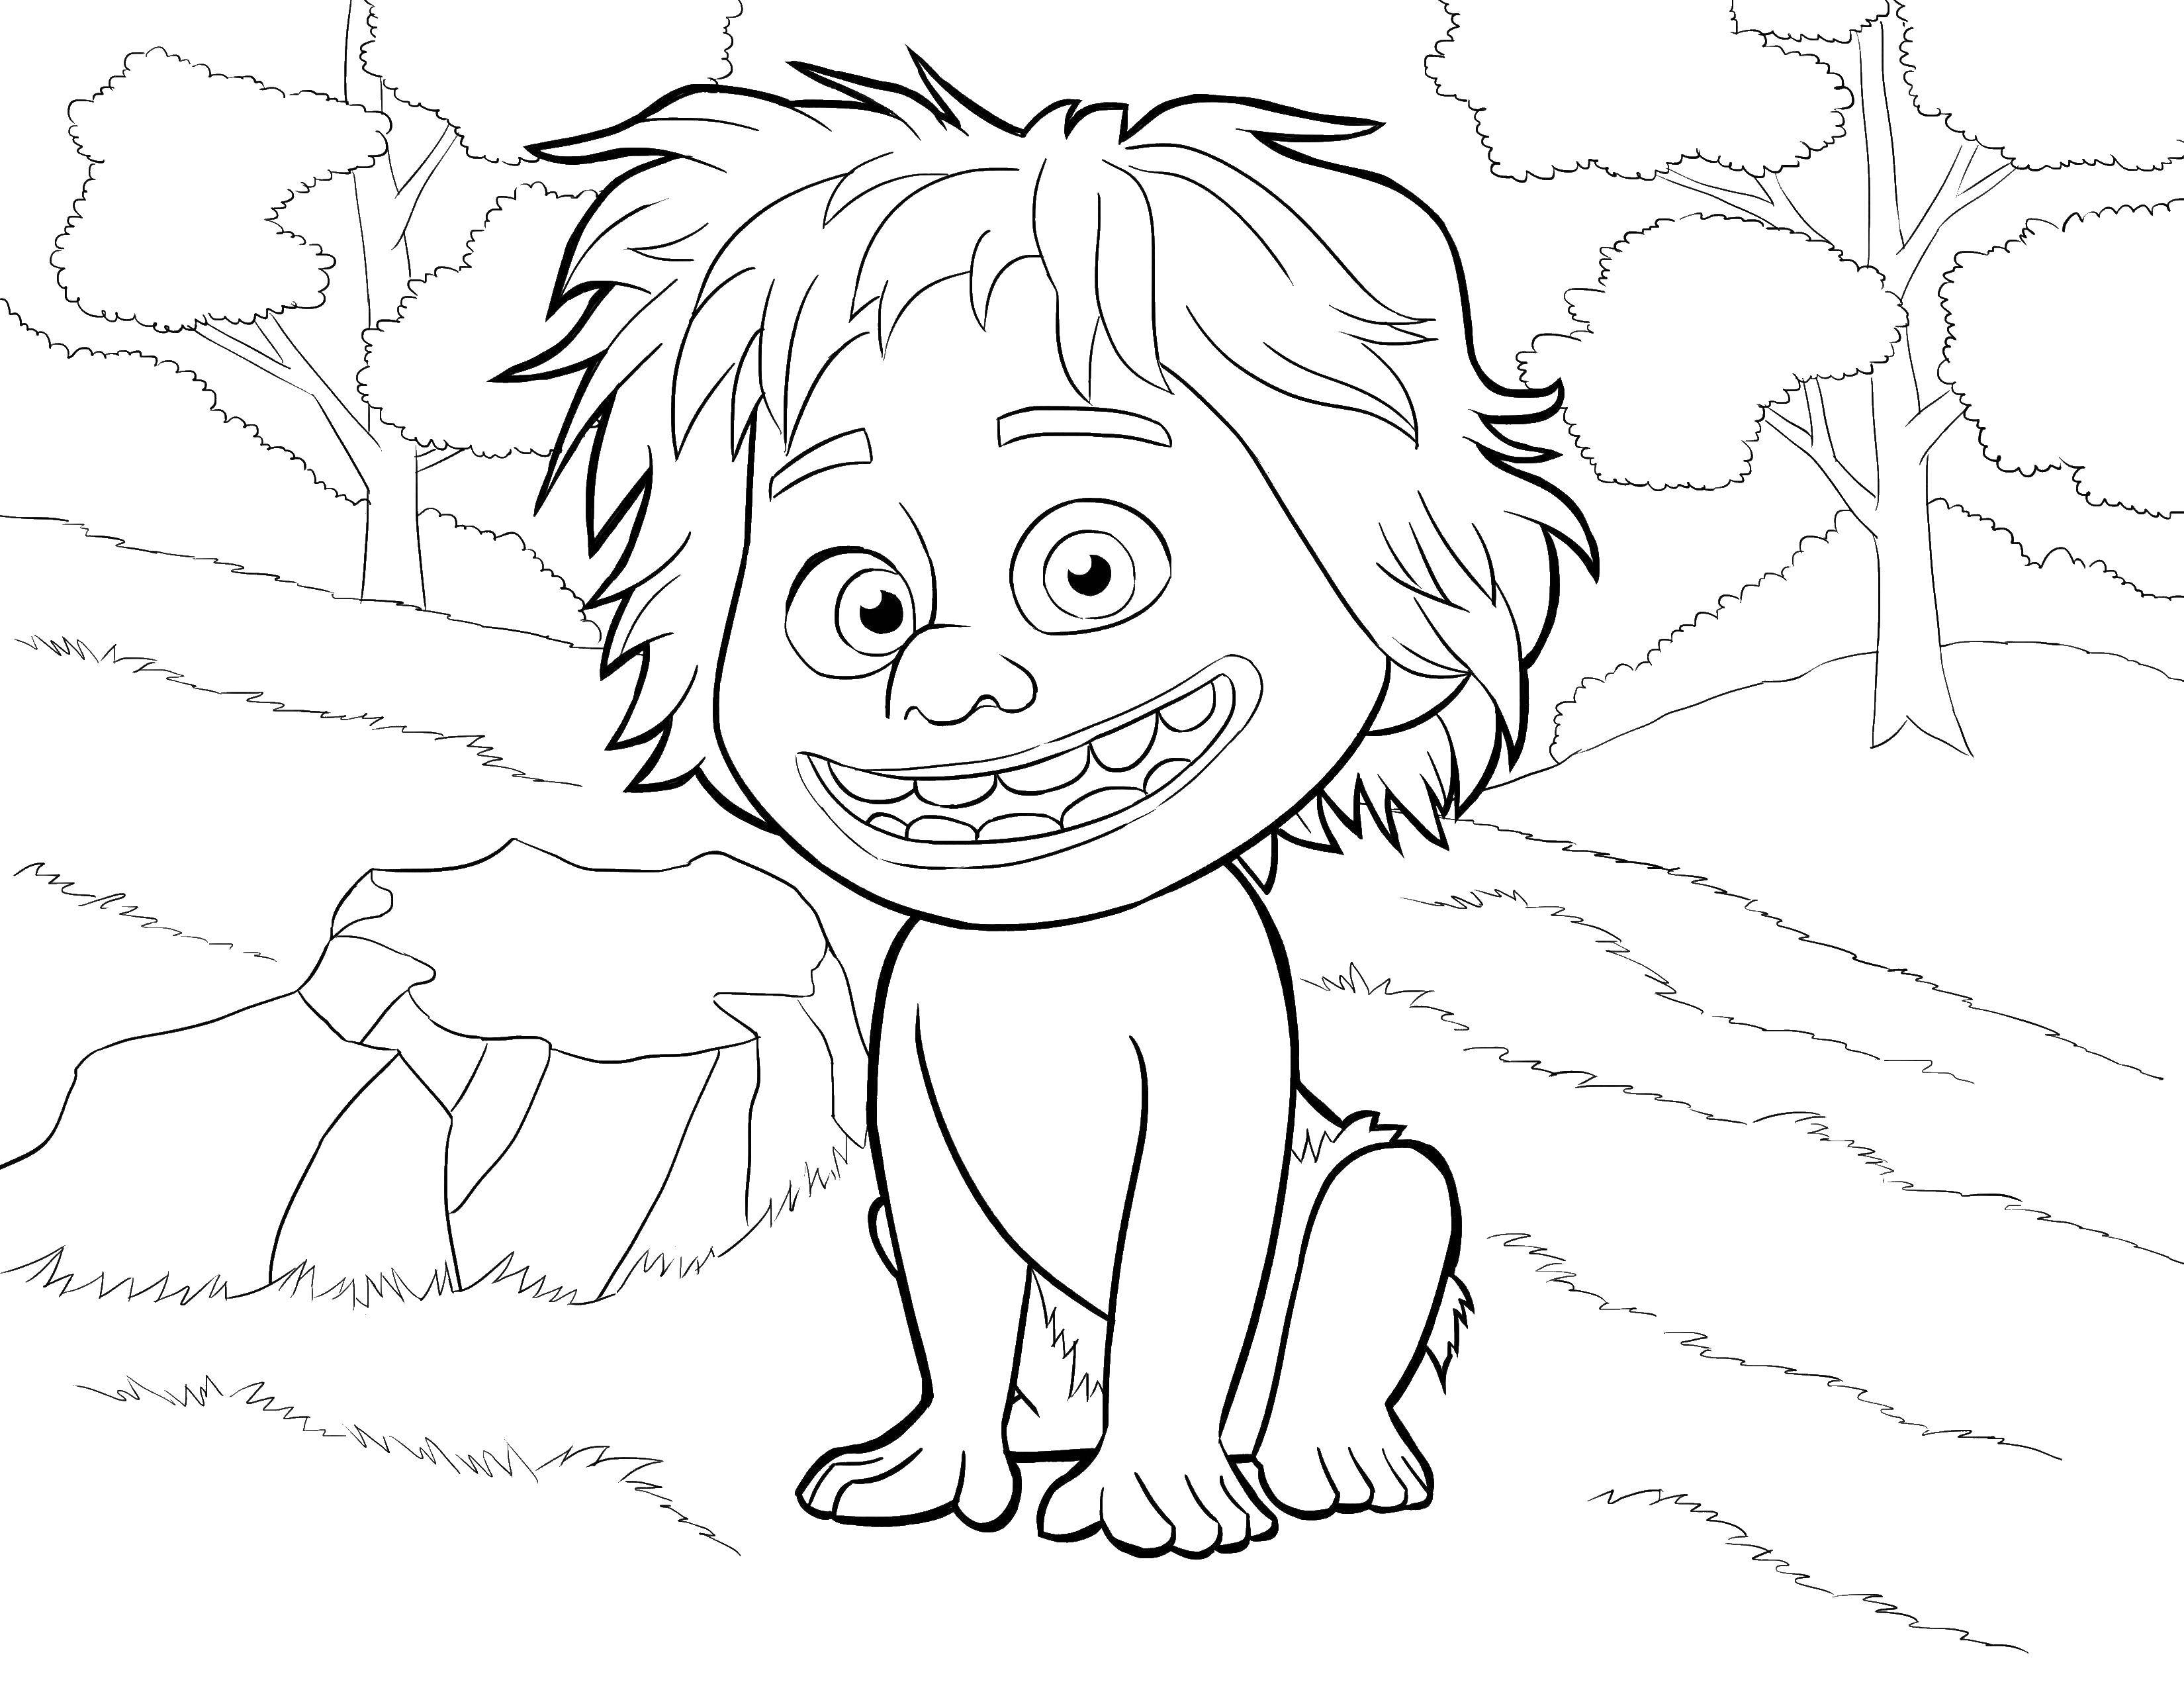 Coloring Buddy is a small cave boy. Category dinosaur. Tags:  Buddy , the cave boy.